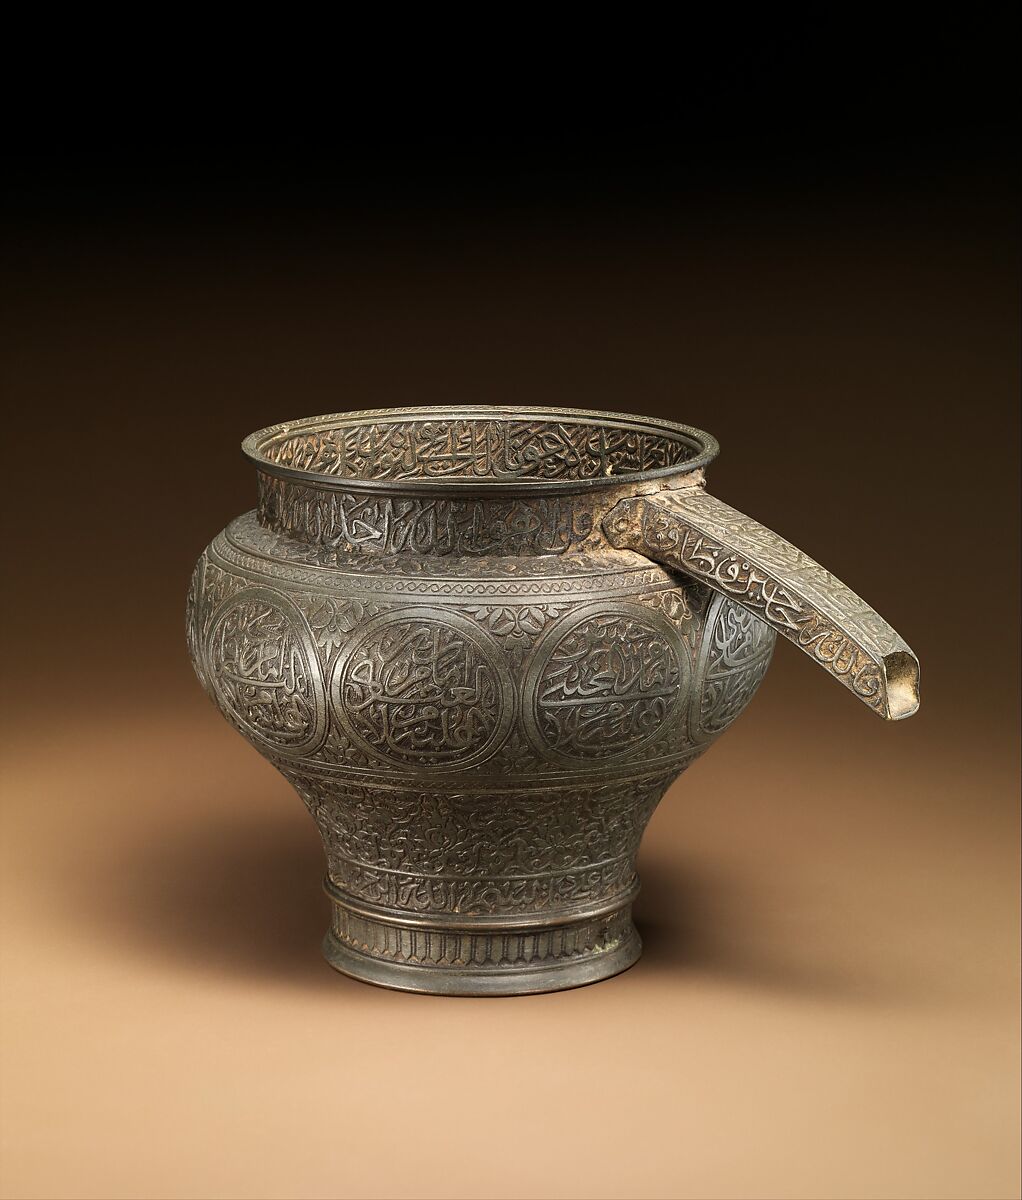 Spouted Vessel with Qur'anic Verses and the Names of the Shi'a Imams, Chased and worked copper alloy 